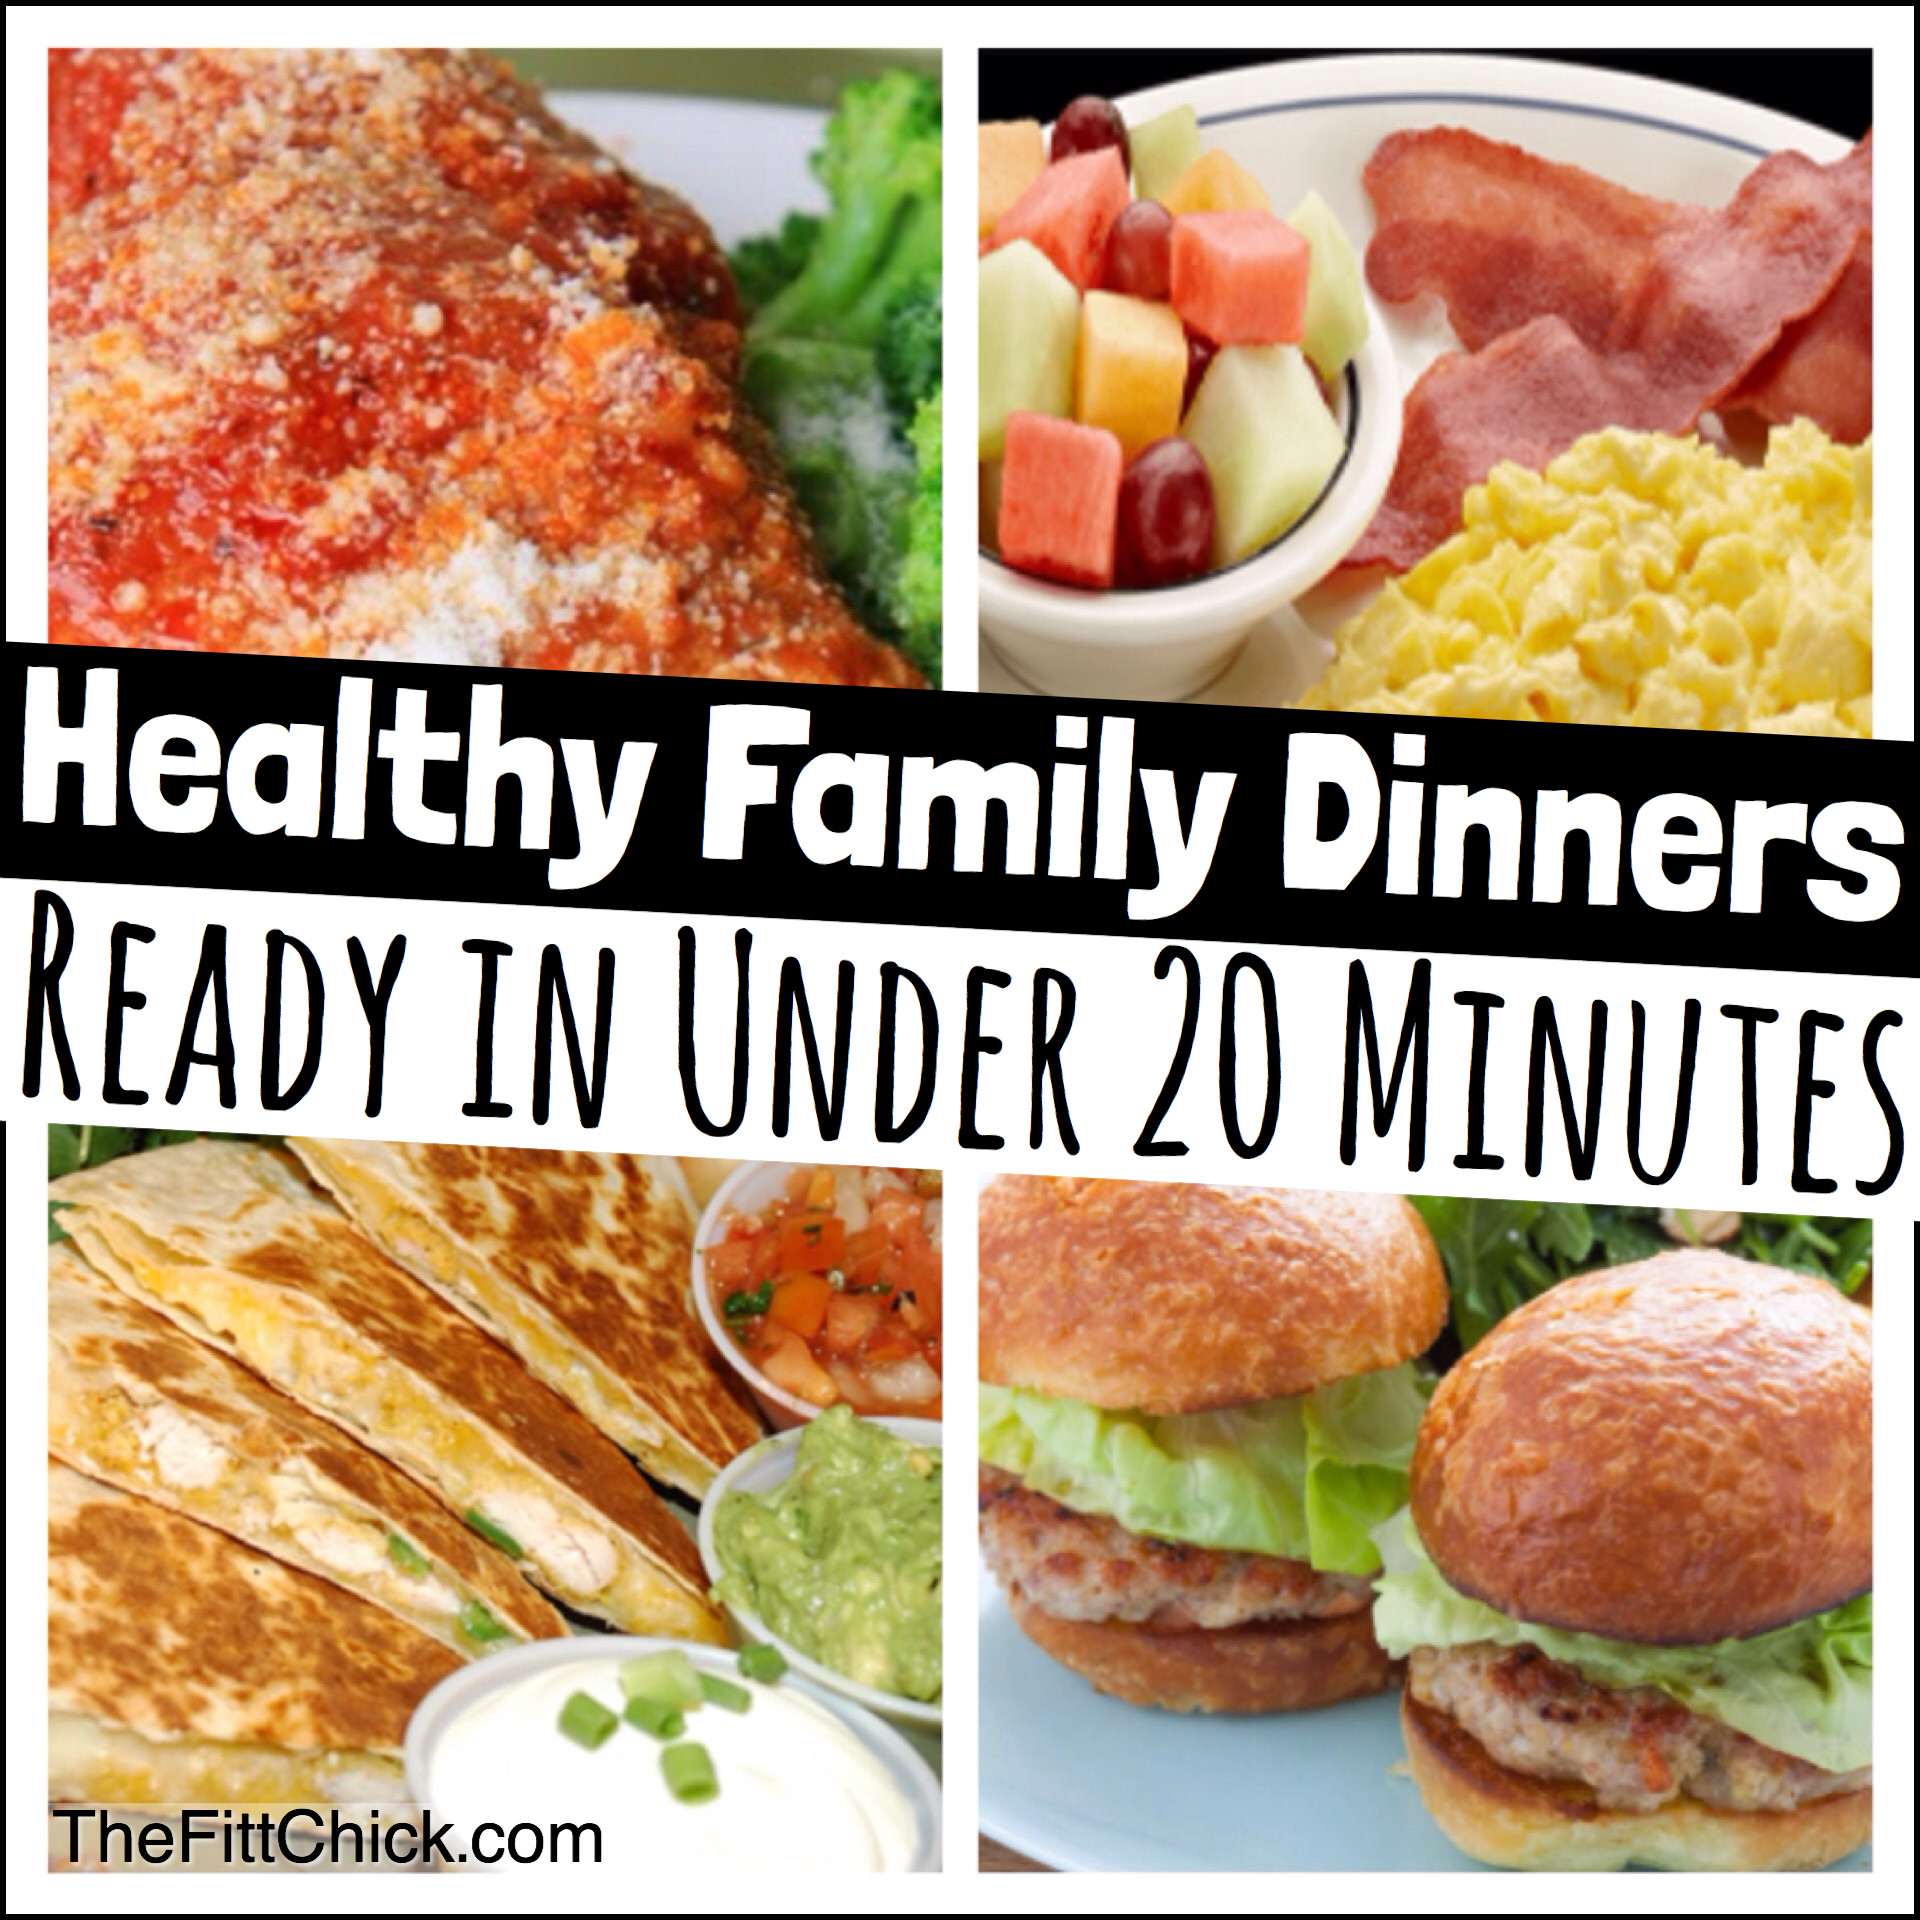 Healthy Dinner For Kids
 Healthy Family dinners in under 20 minutes